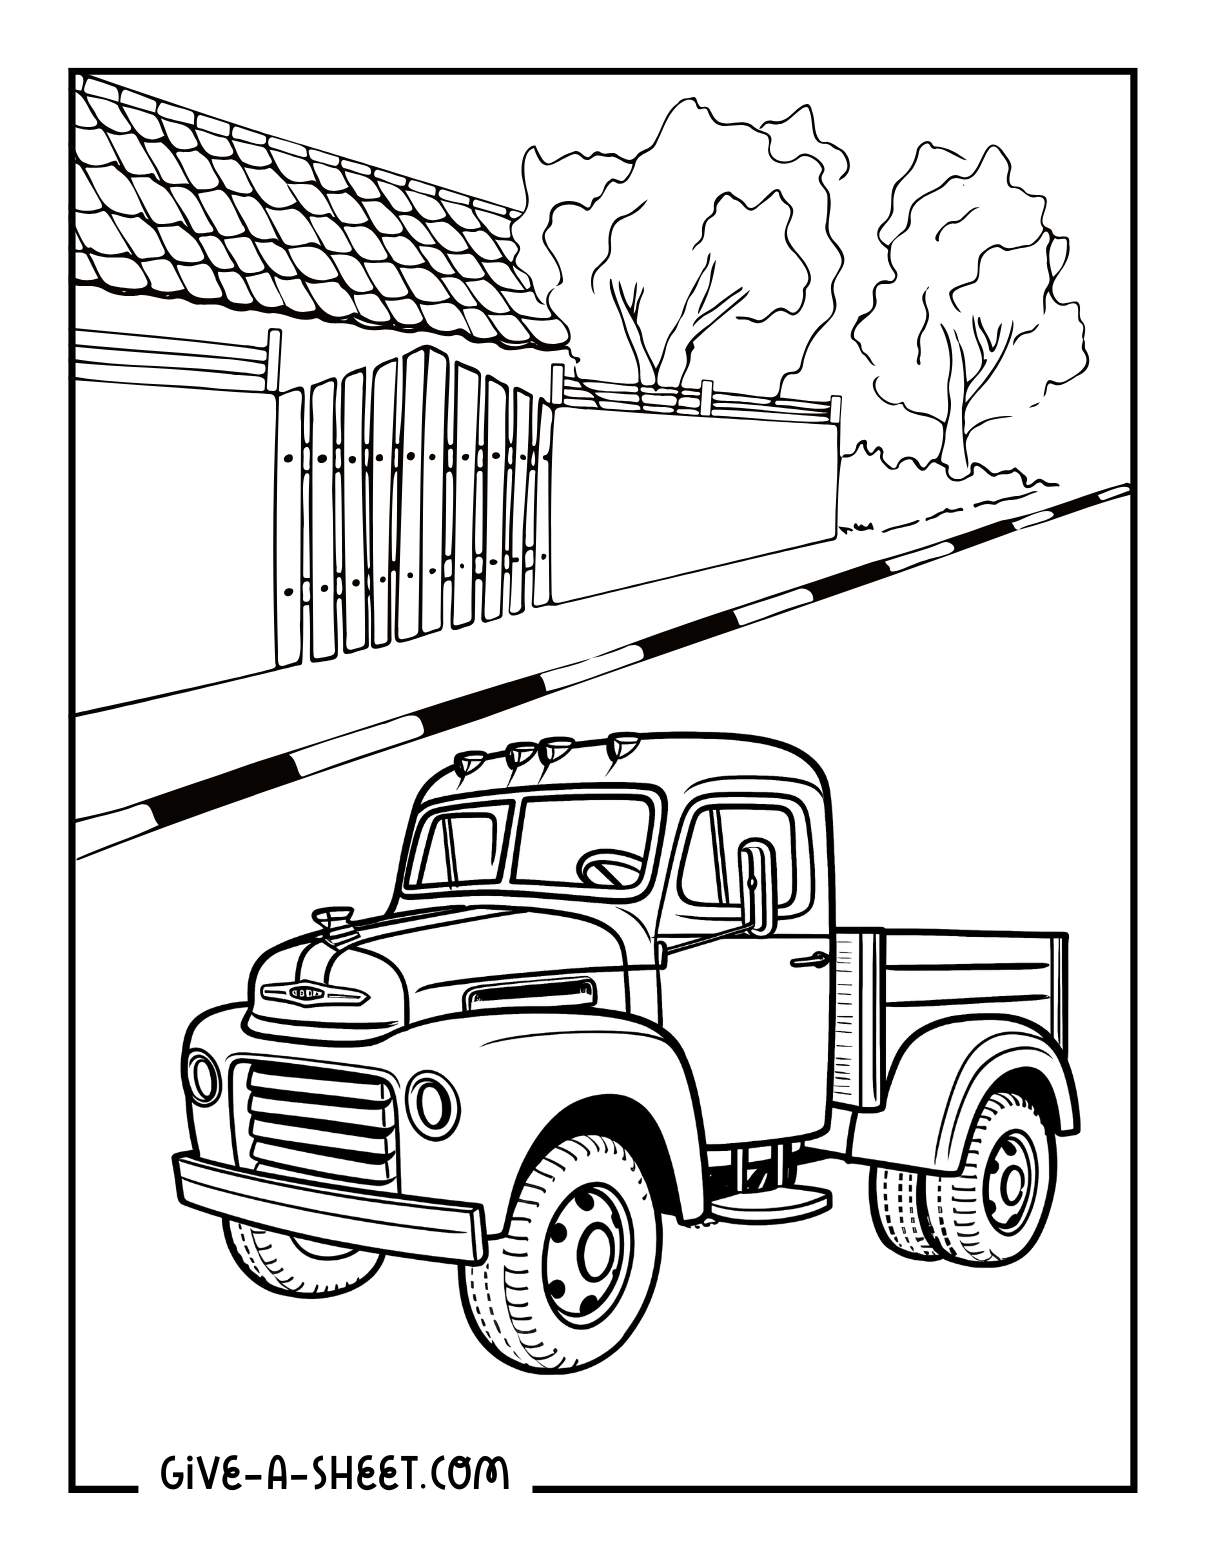 Antique pick up truck coloring page.